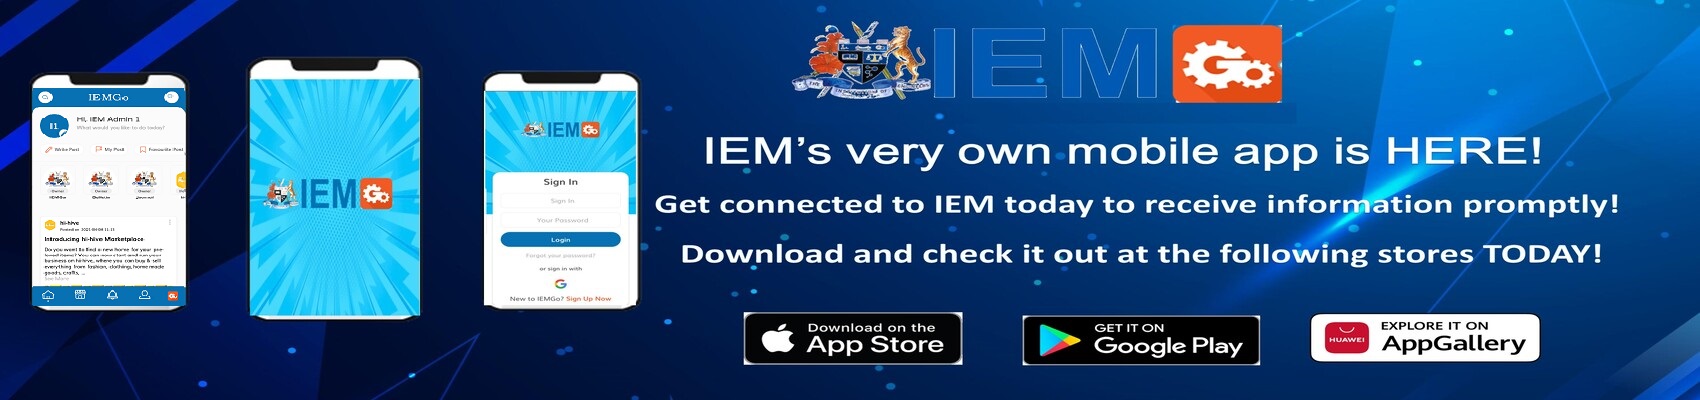 IEMGo mobile apps